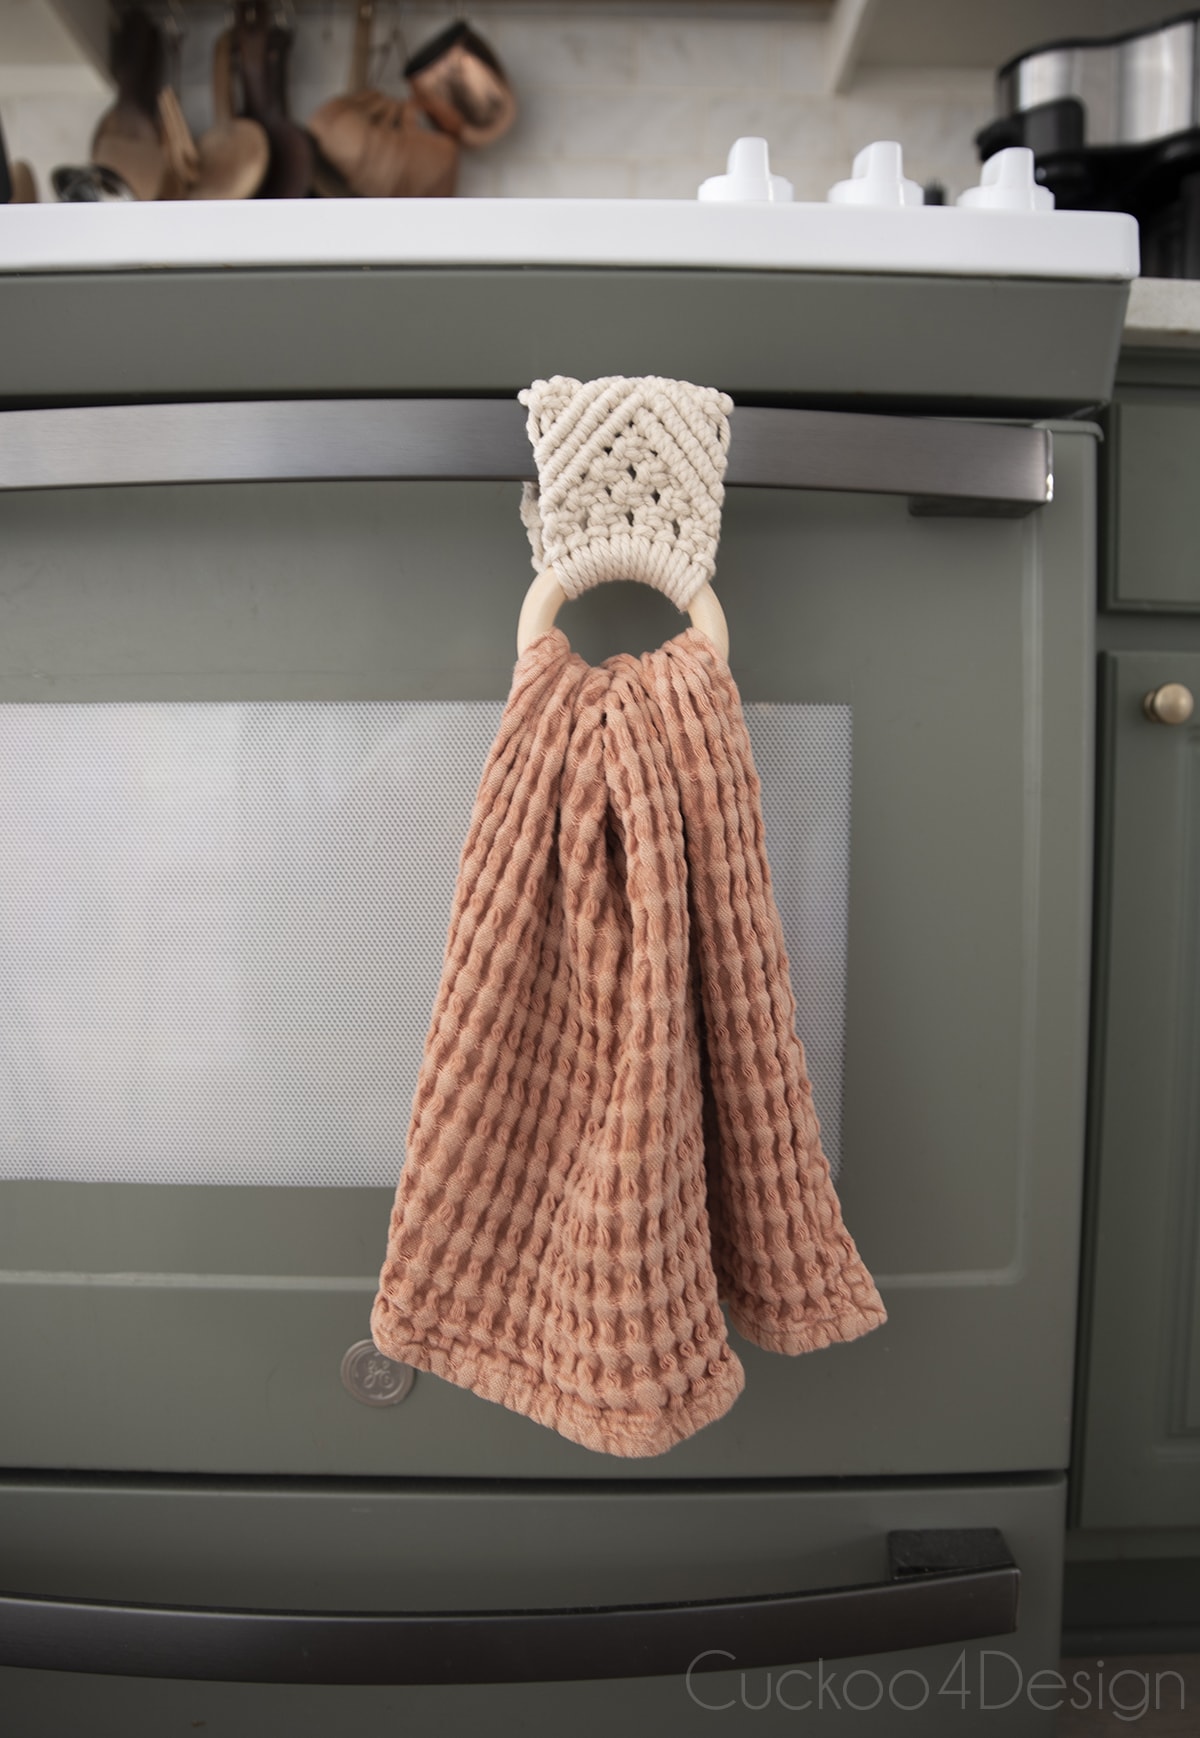 close-up of macrame towel holder on stove handle